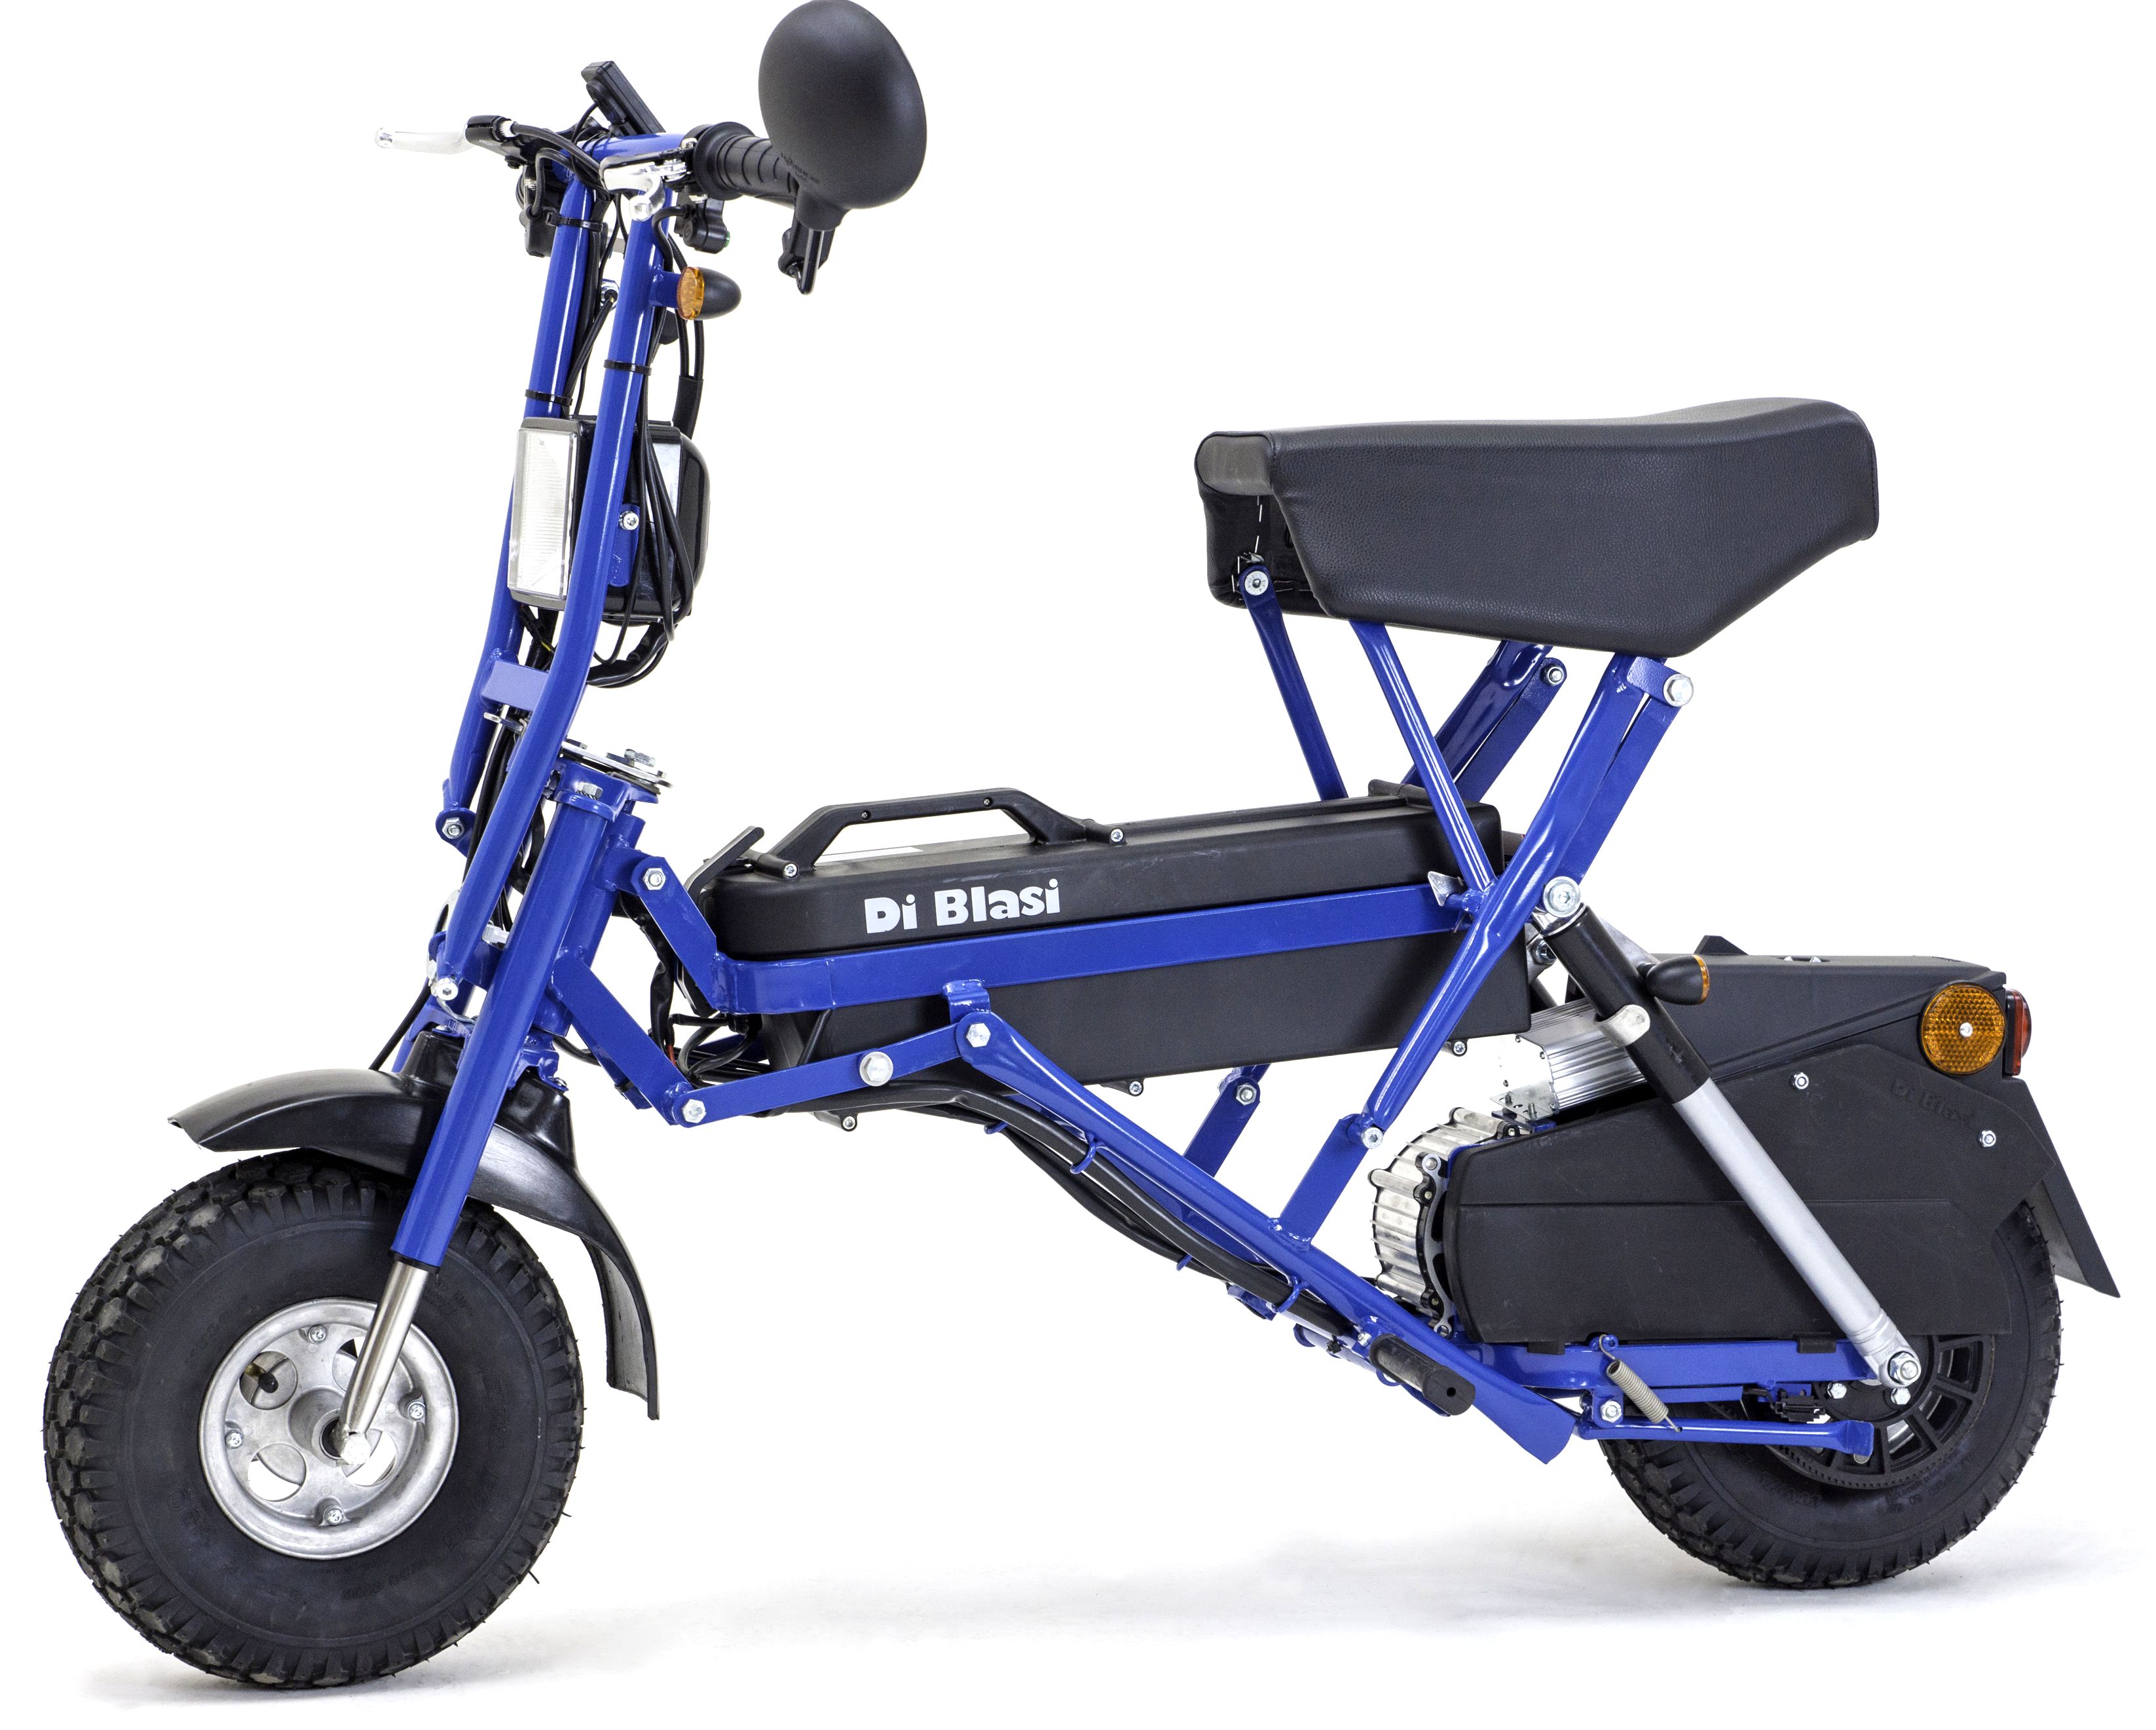 Electric Folding Scooter Mod. R70